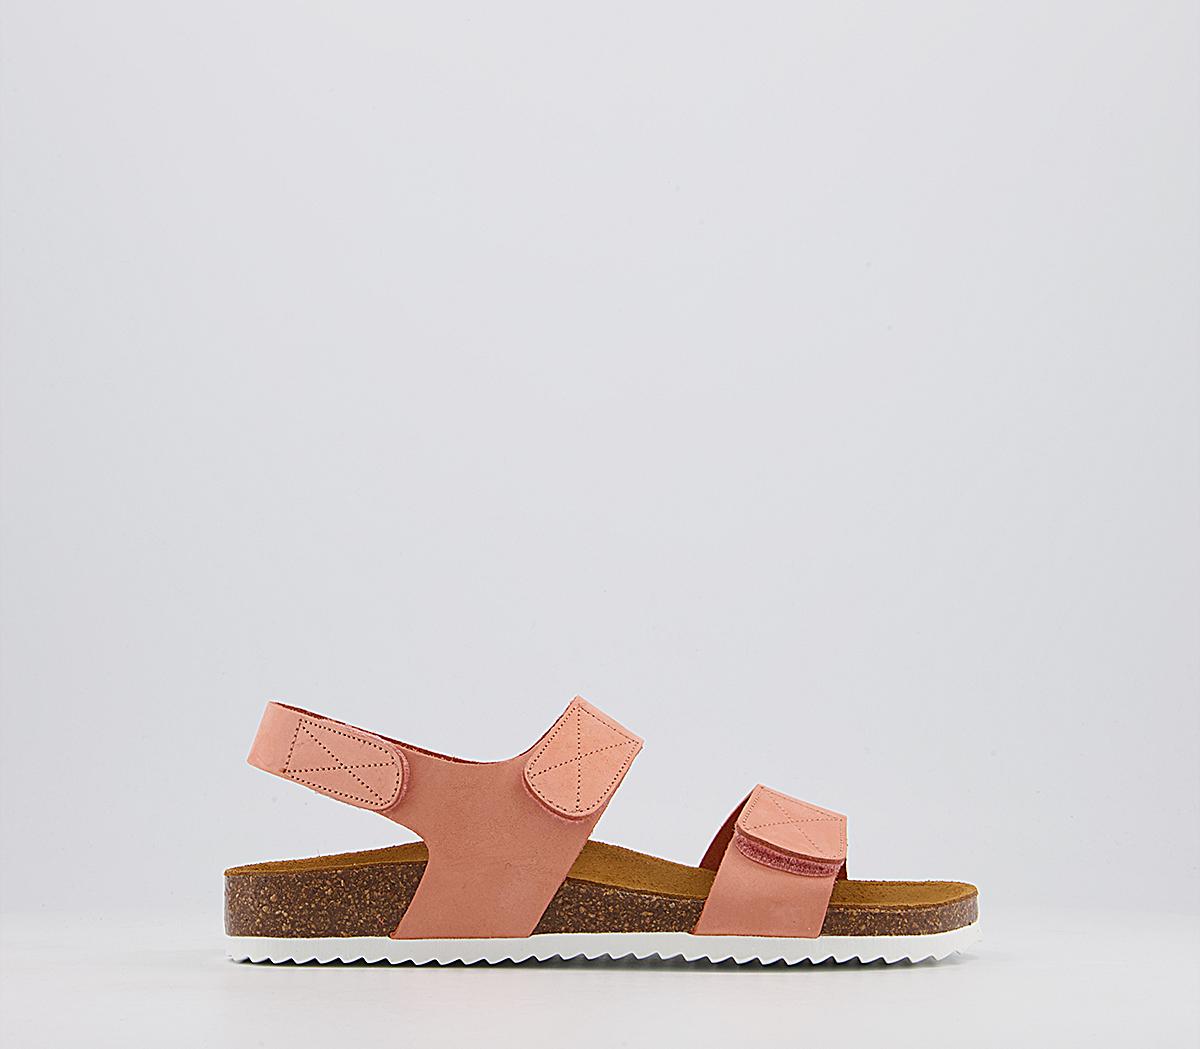 OFFICESerpent Double Strap Sling Footbed SandalsBaked Coral Nubuck